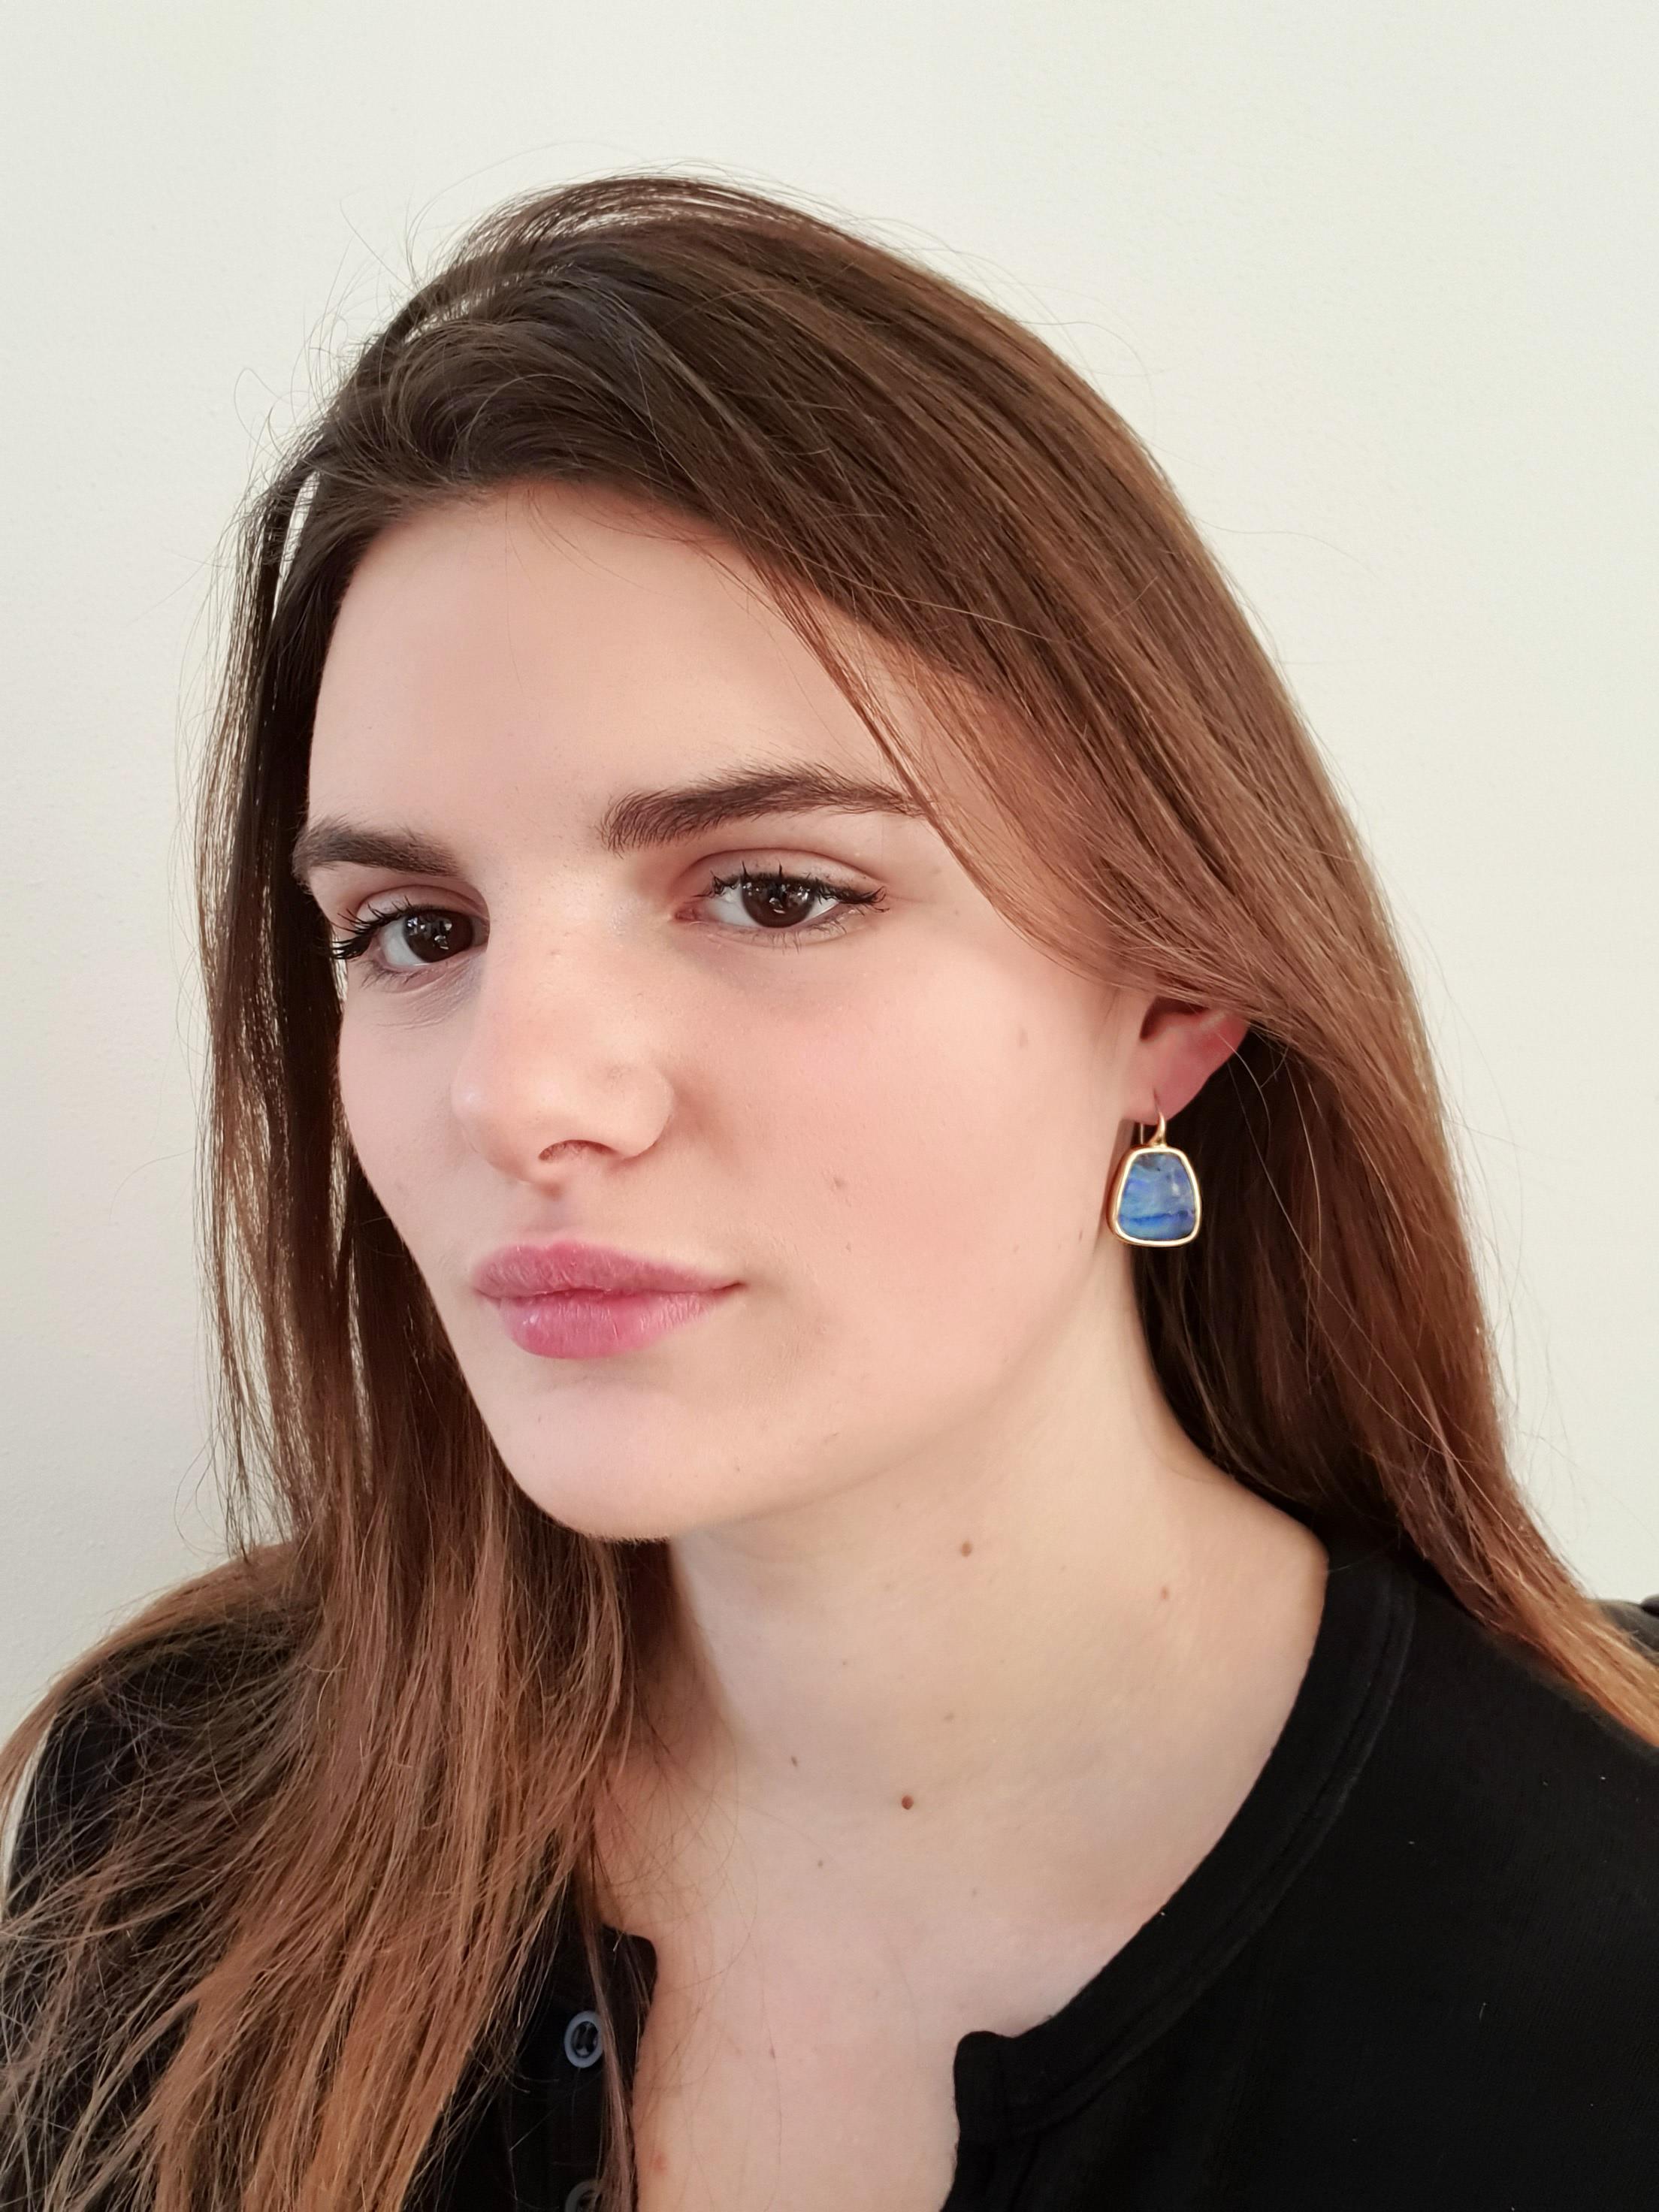 Dalben design One of a kind 18k yellow gold semi lucid finishing earrings with two blue bezel set Australian Boulder Opals weighing 18,7 carats.  
Dimension: width 18 mm height without leverback 19 mm  
The earrings has been designed and handcrafted